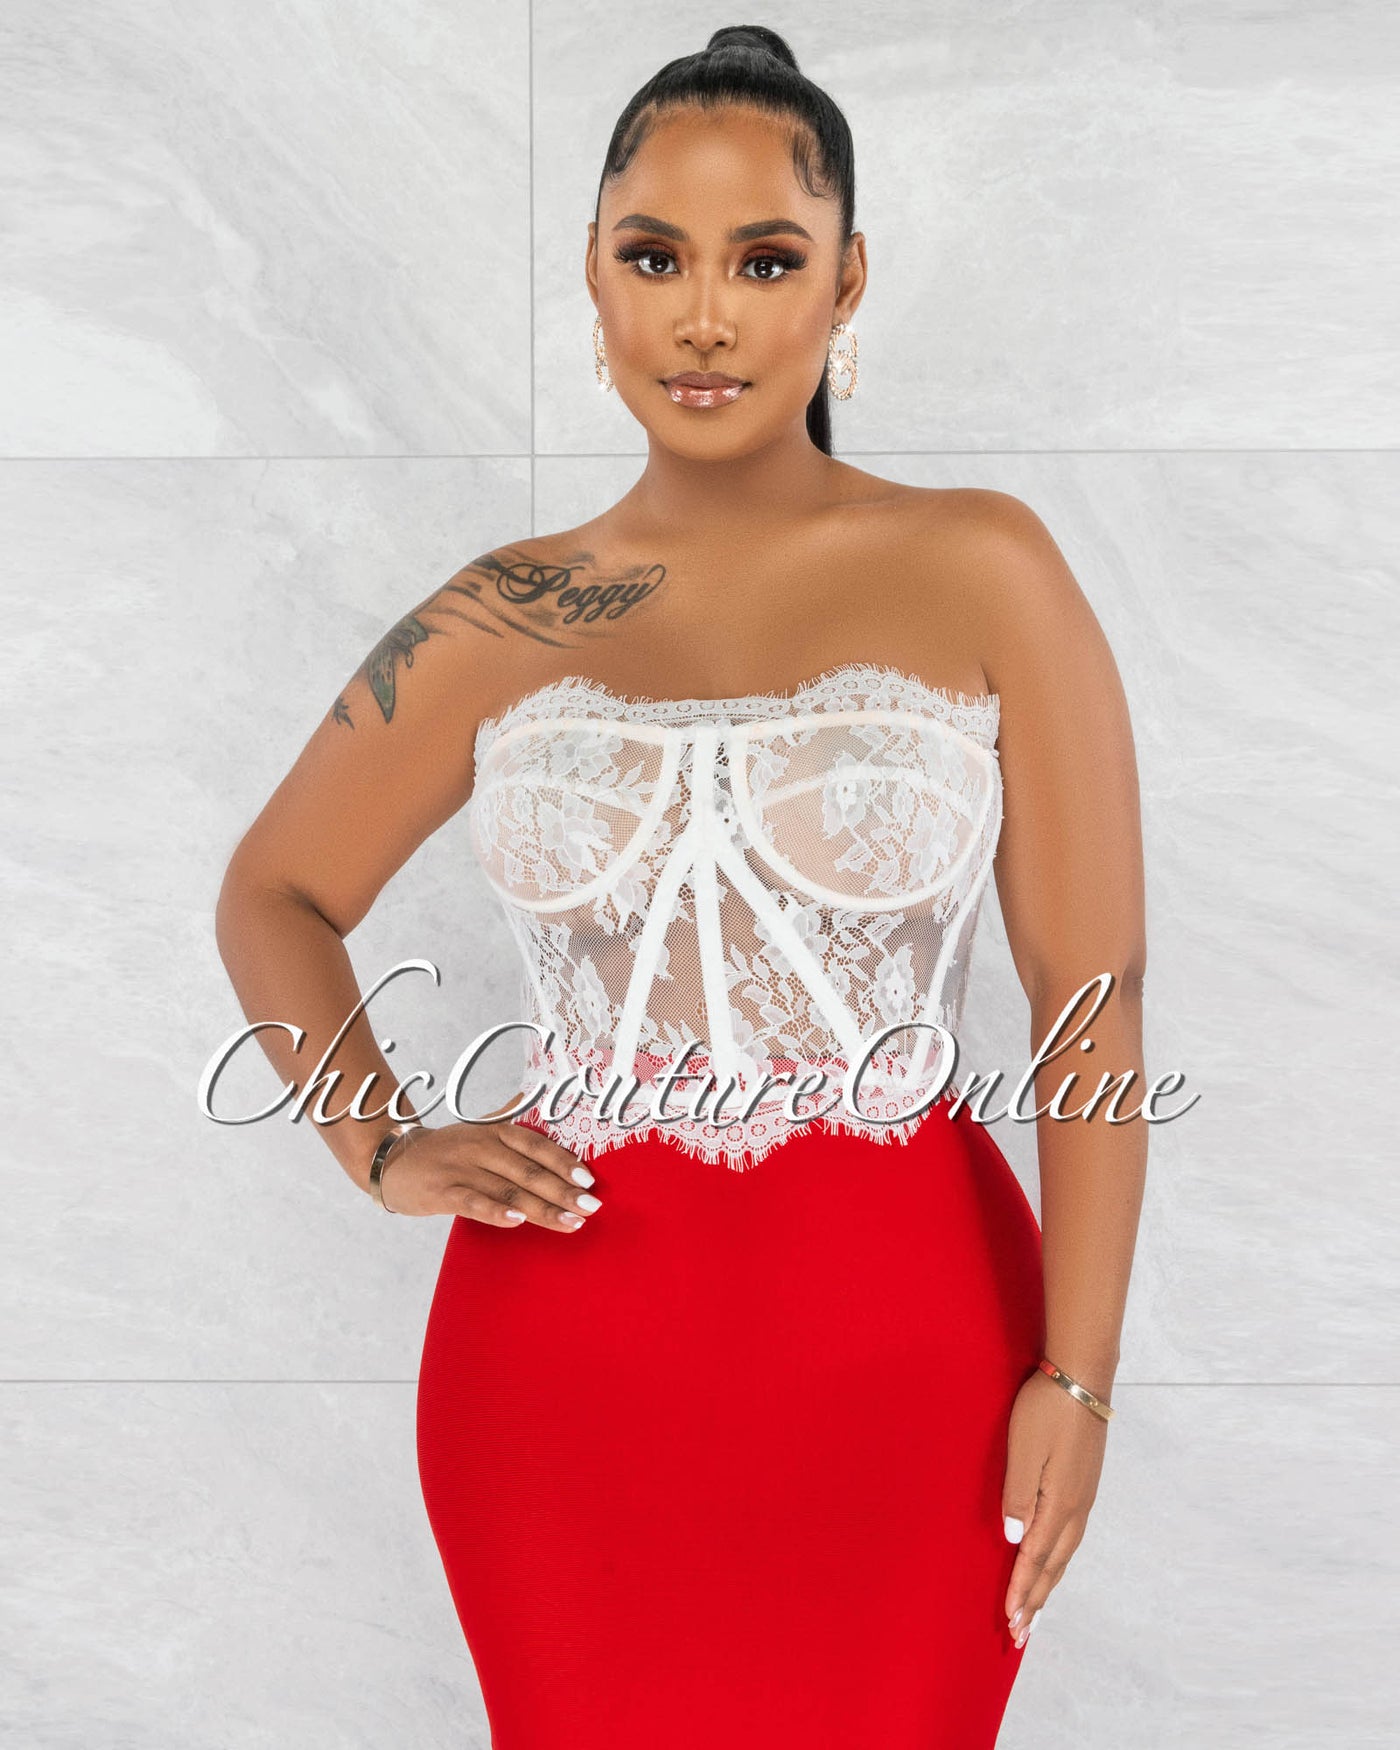 Abigail Off-White Lace Strapless Croset Sheer Top